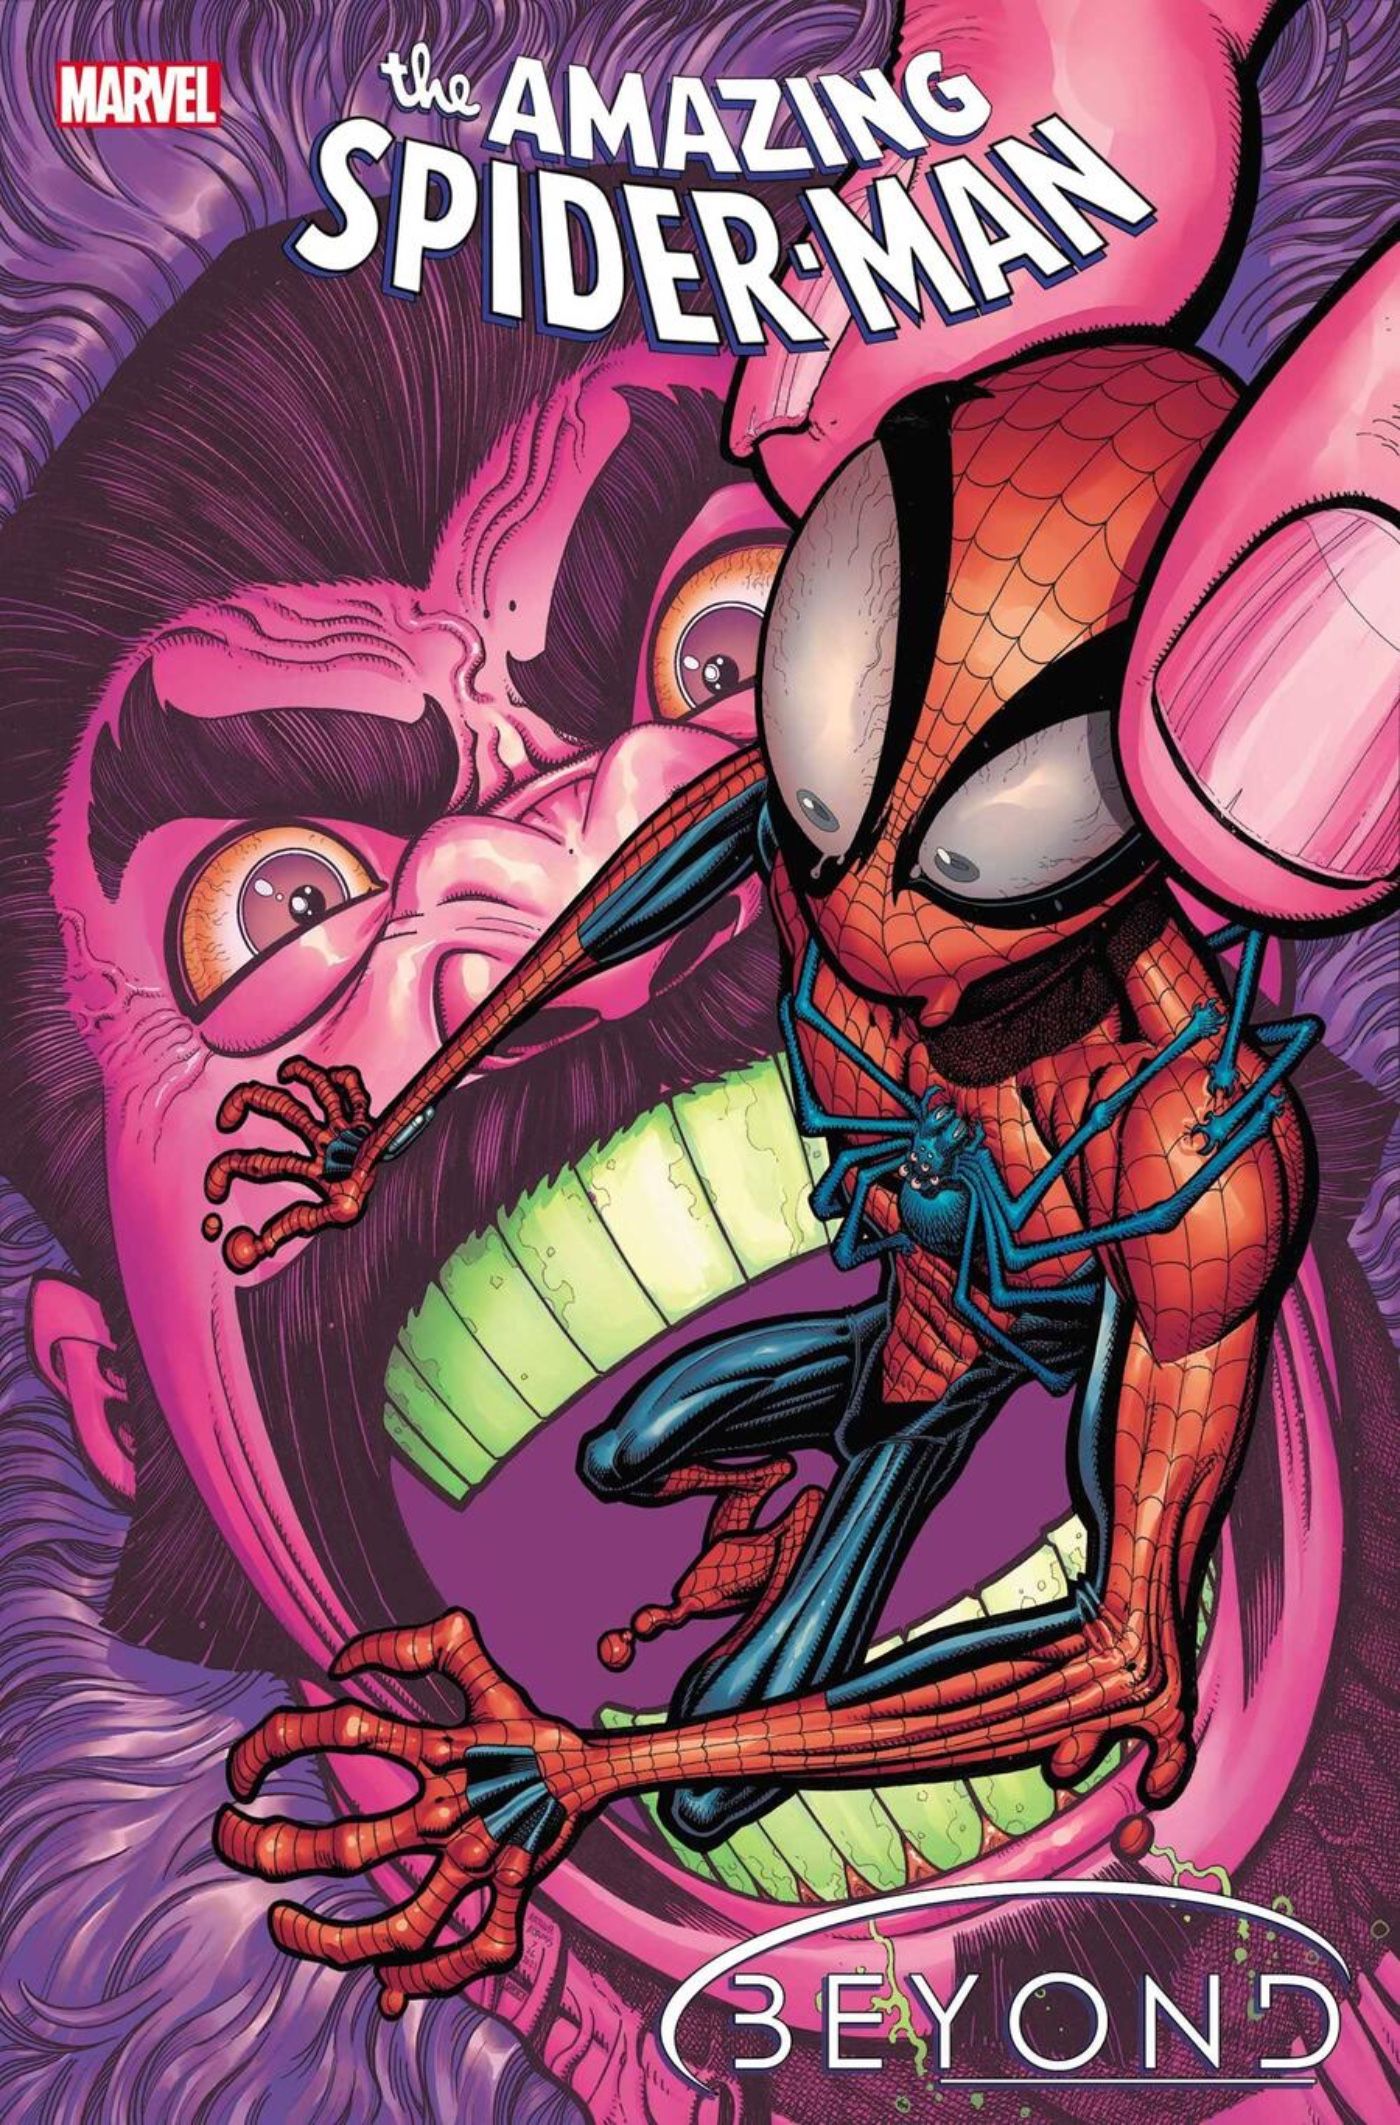 A psychedelic scene involving Kraven and the Ben Reilly Spider-Man